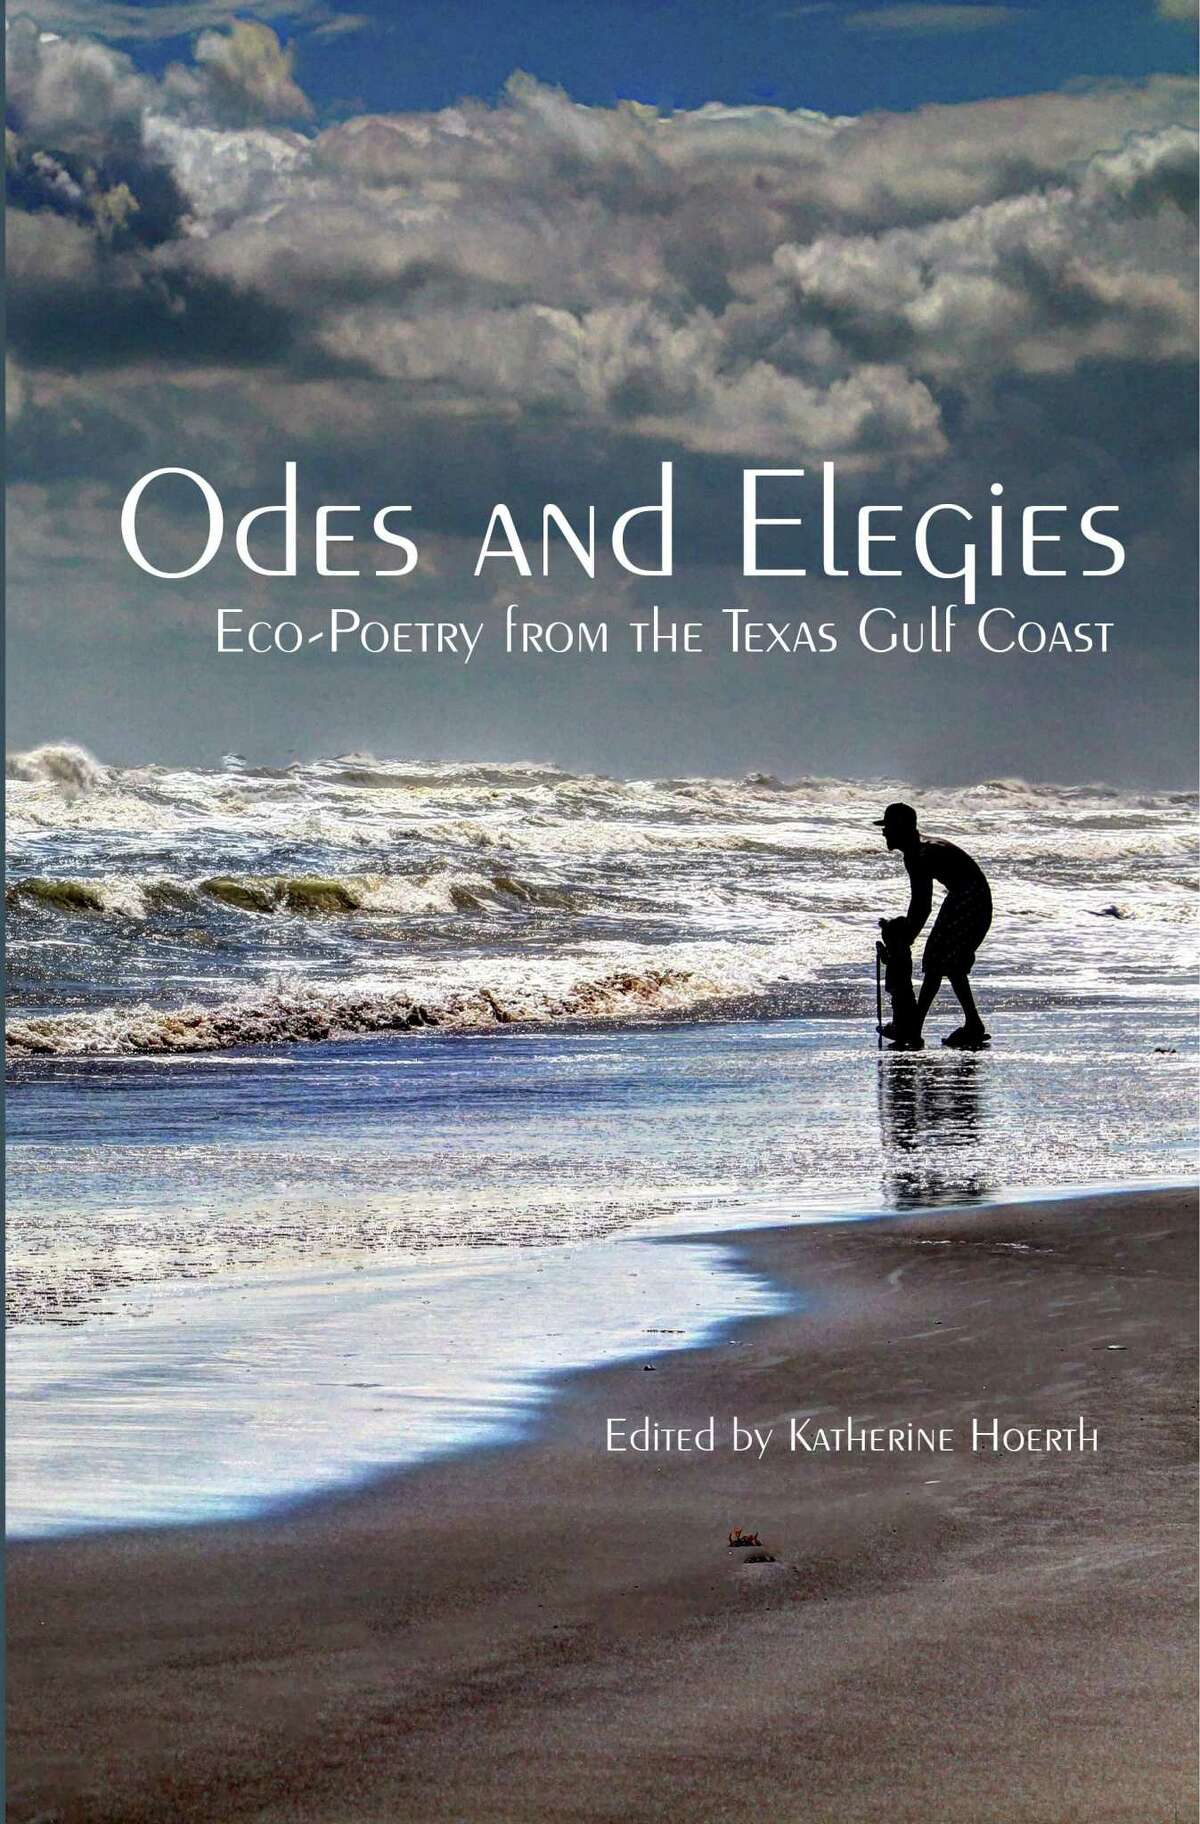 “Odes and Elegies: Eco-Poetry from the Texas Gulf Coast” is an anthology of poetry written by poets from all walks of life about the Gulf Coast region of Texas. The new anthology features a poem by Conroe poet Dave Parsons about the late Priest Hubert Kealy who served at Sacred Heart Catholic Church.